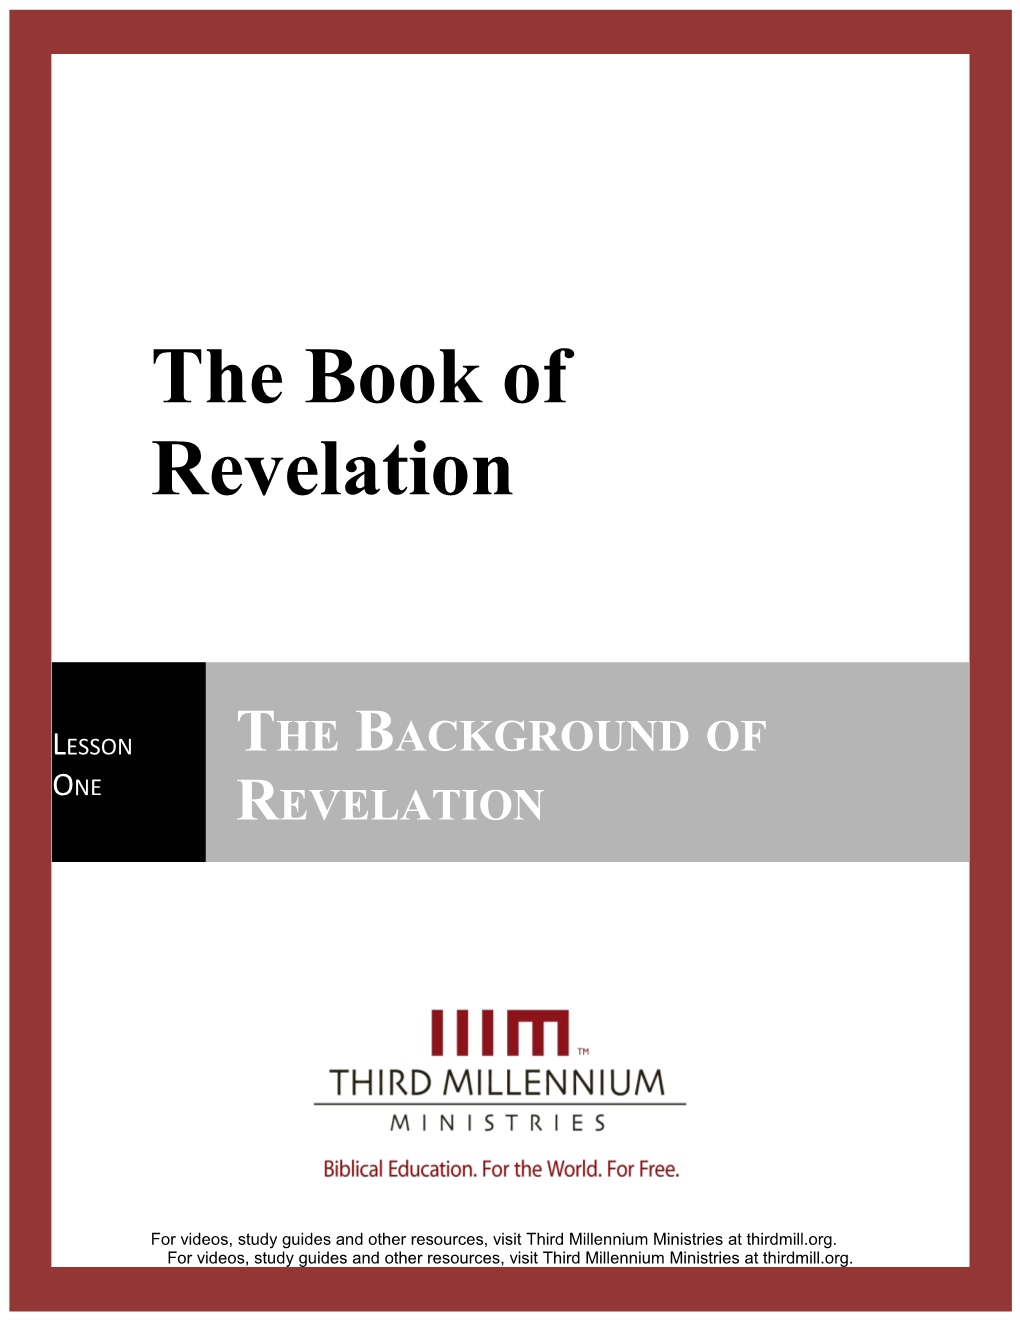 The Book of Revelation, Lesson 1